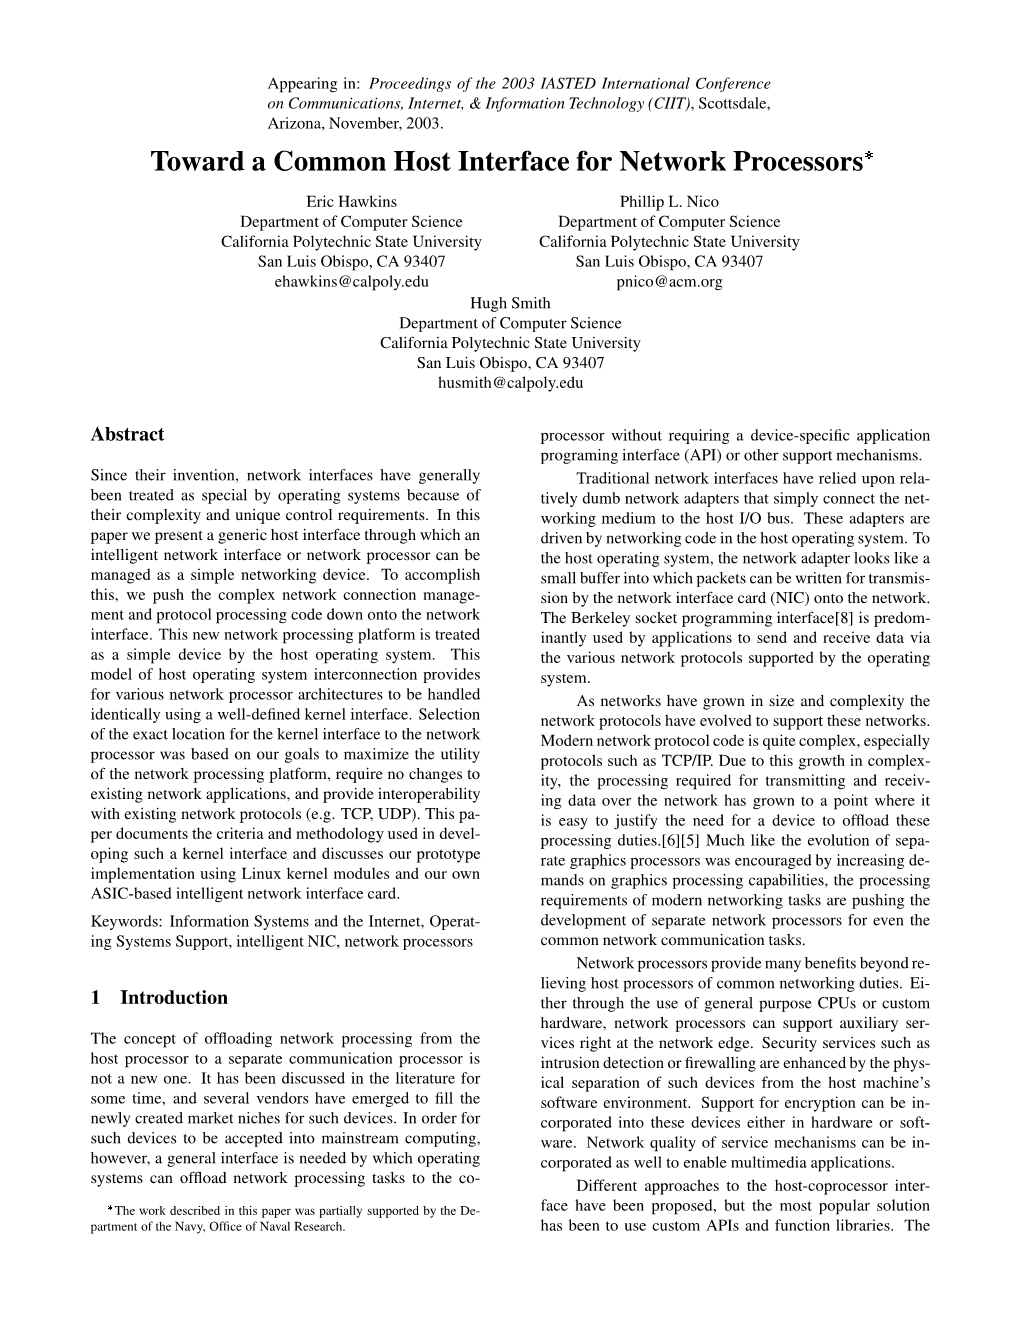 Toward a Common Host Interface for Network Processors Eric Hawkins Phillip L